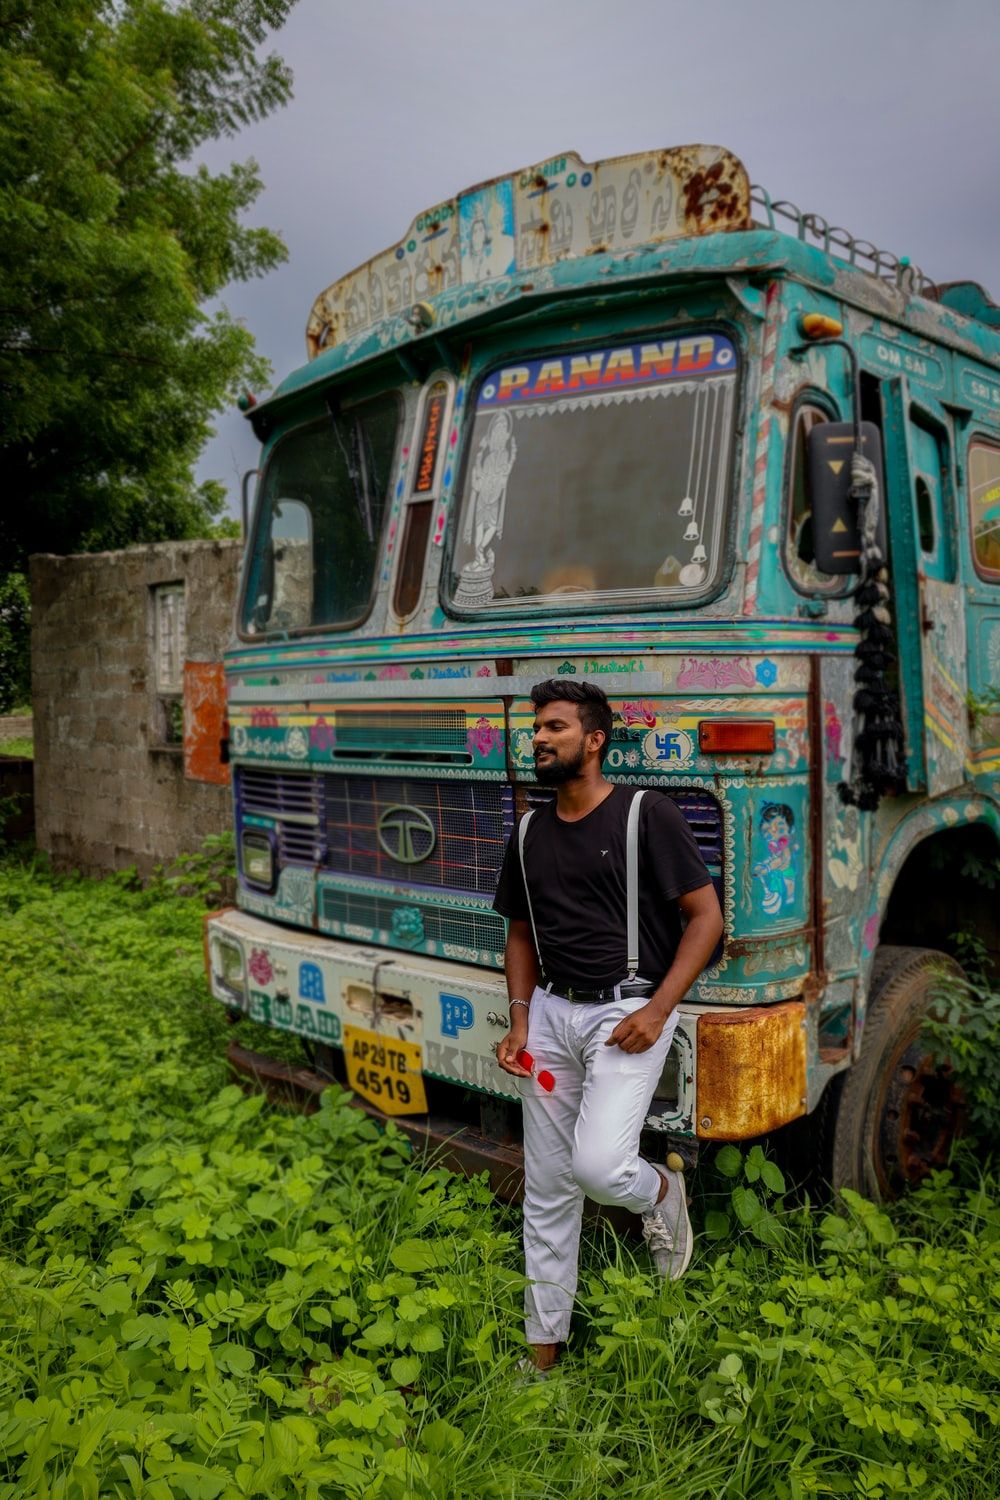 Indian Truck Picture. Download Free Image